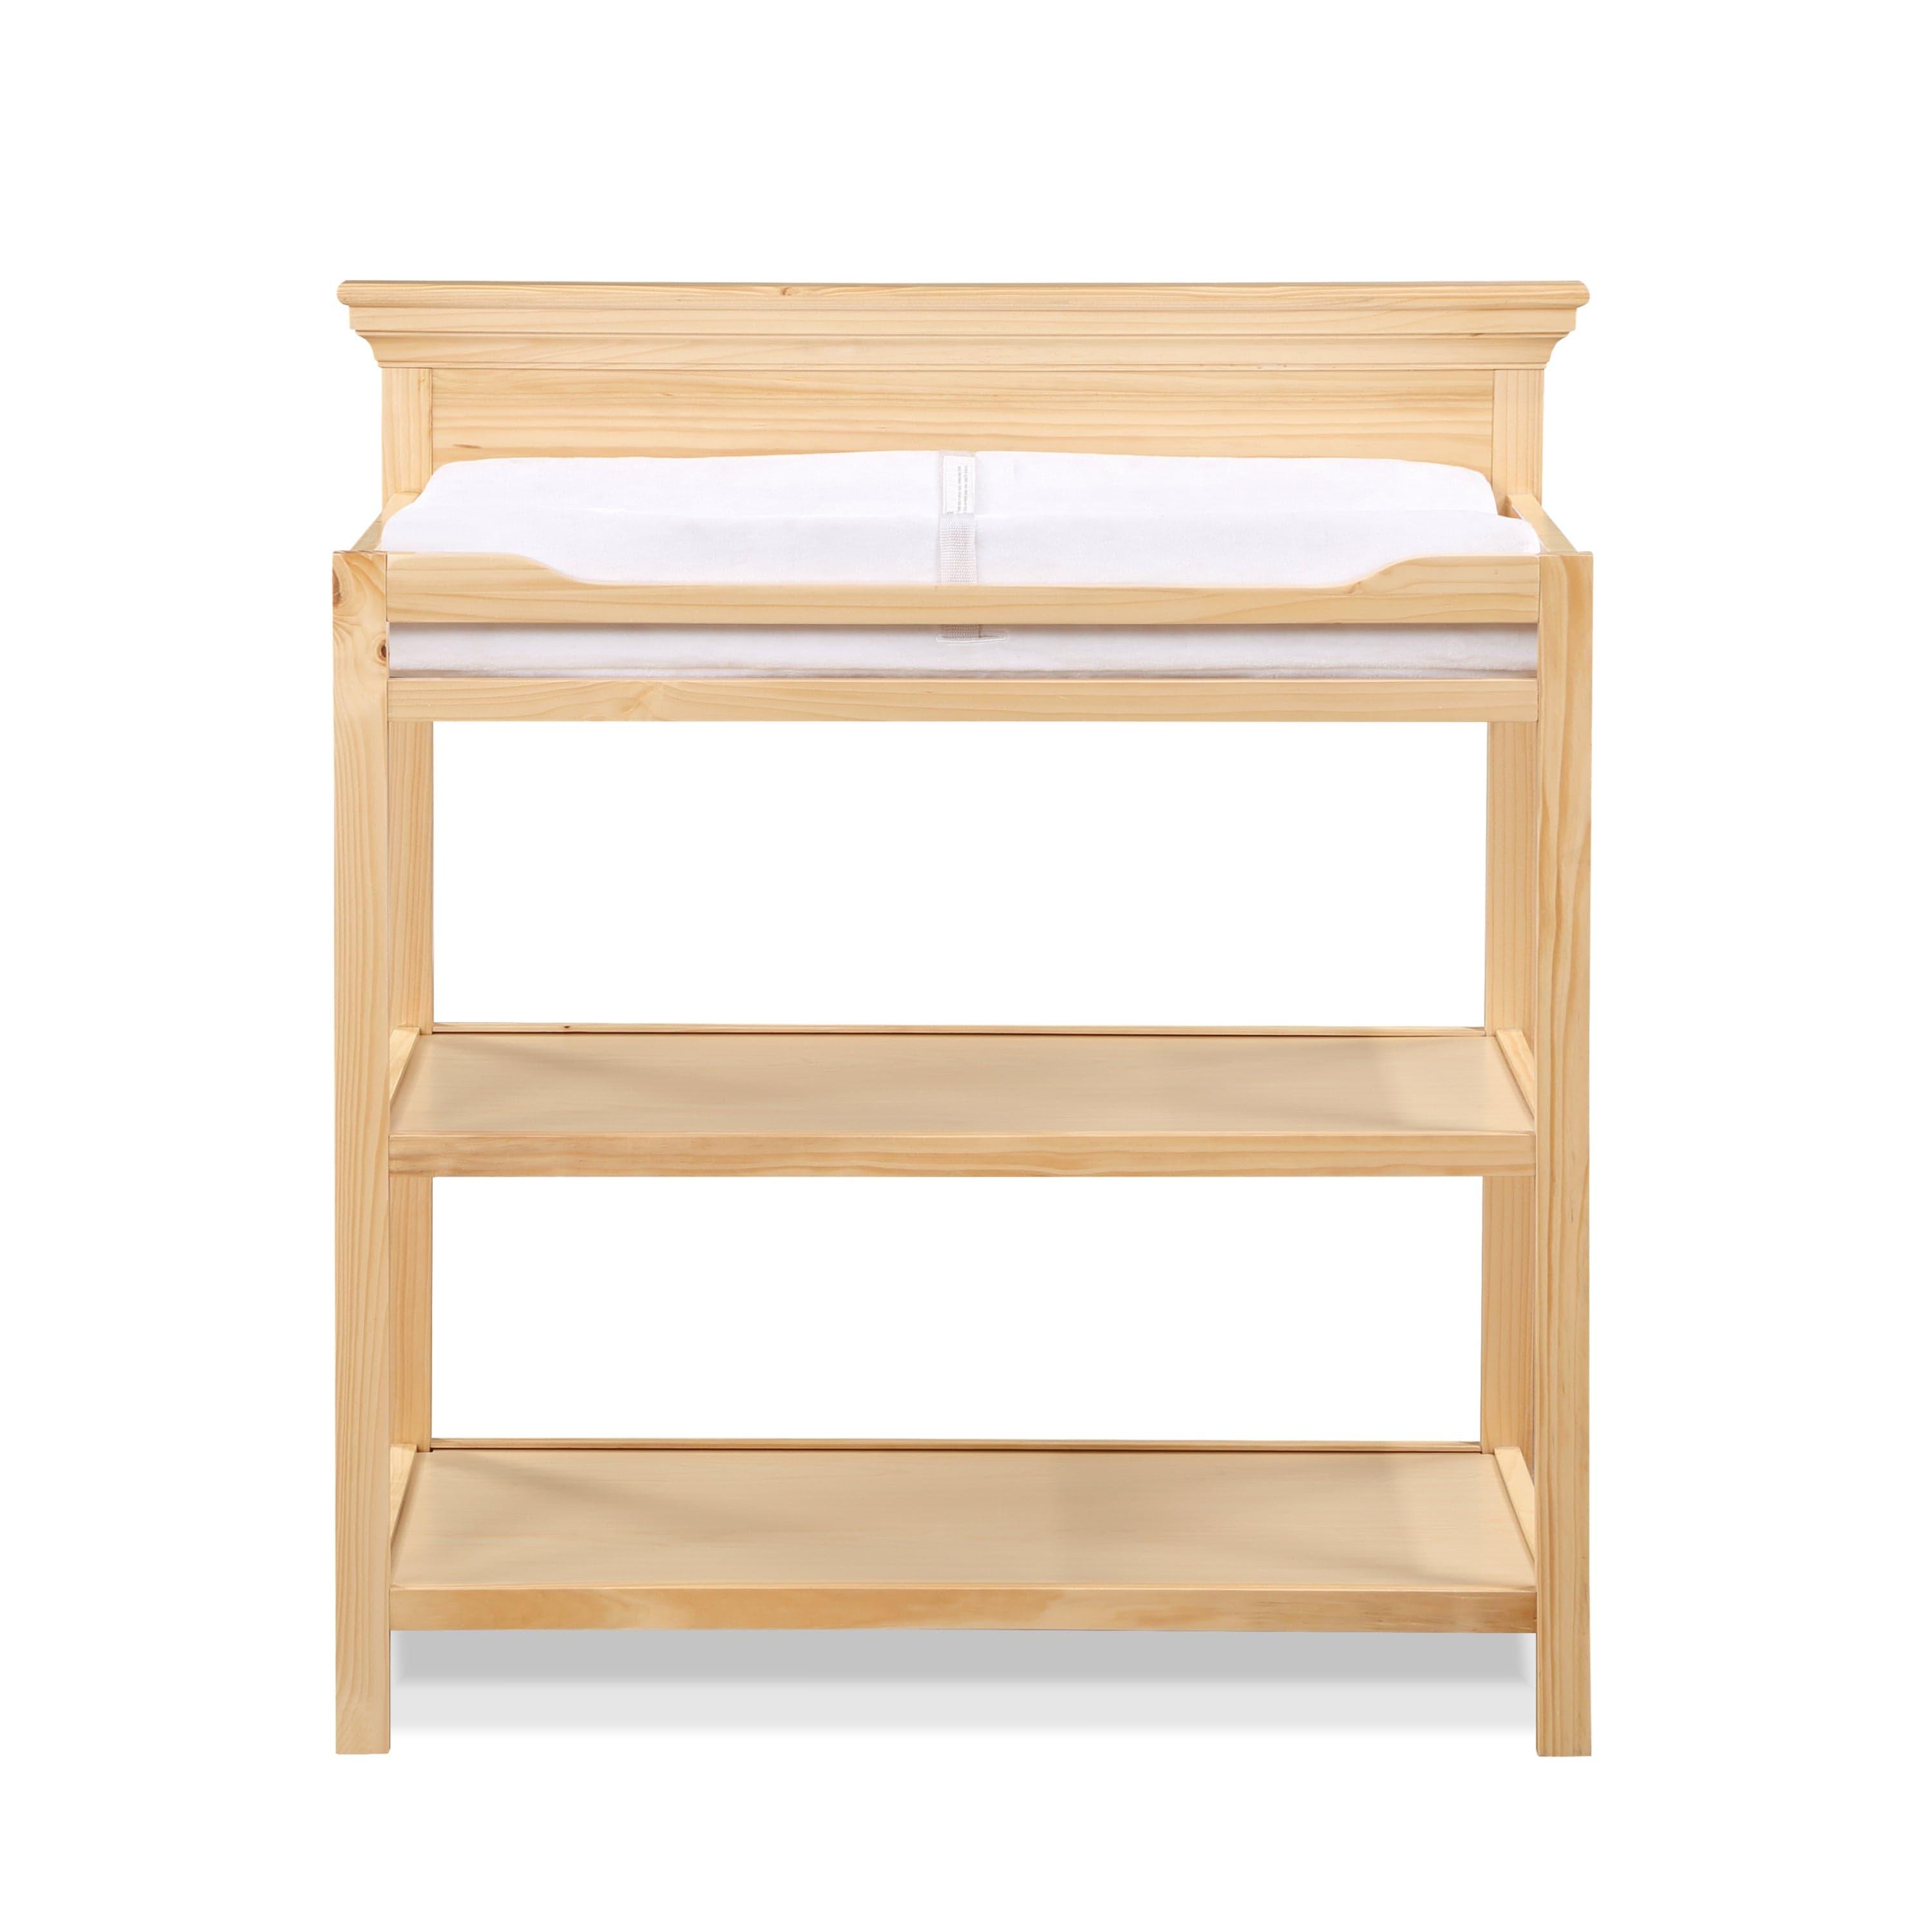 Shop Mambo Wooden Universal Changing Table Mademoiselle Home Decor